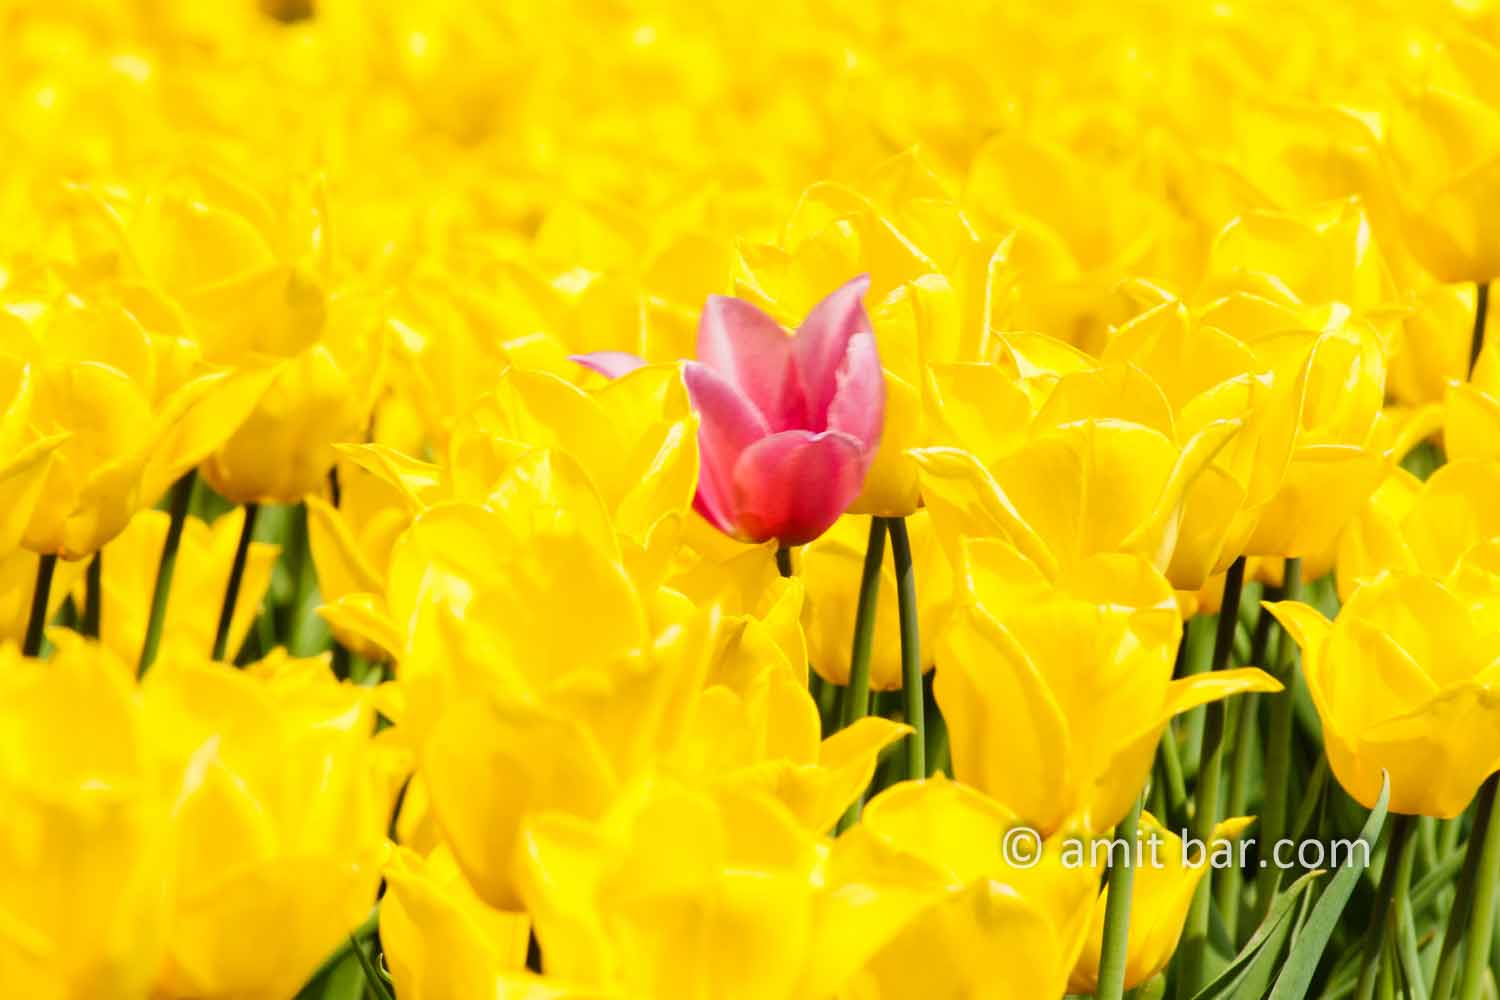 Dutch Spring: Red tulip: Red tulip among yellow tulips